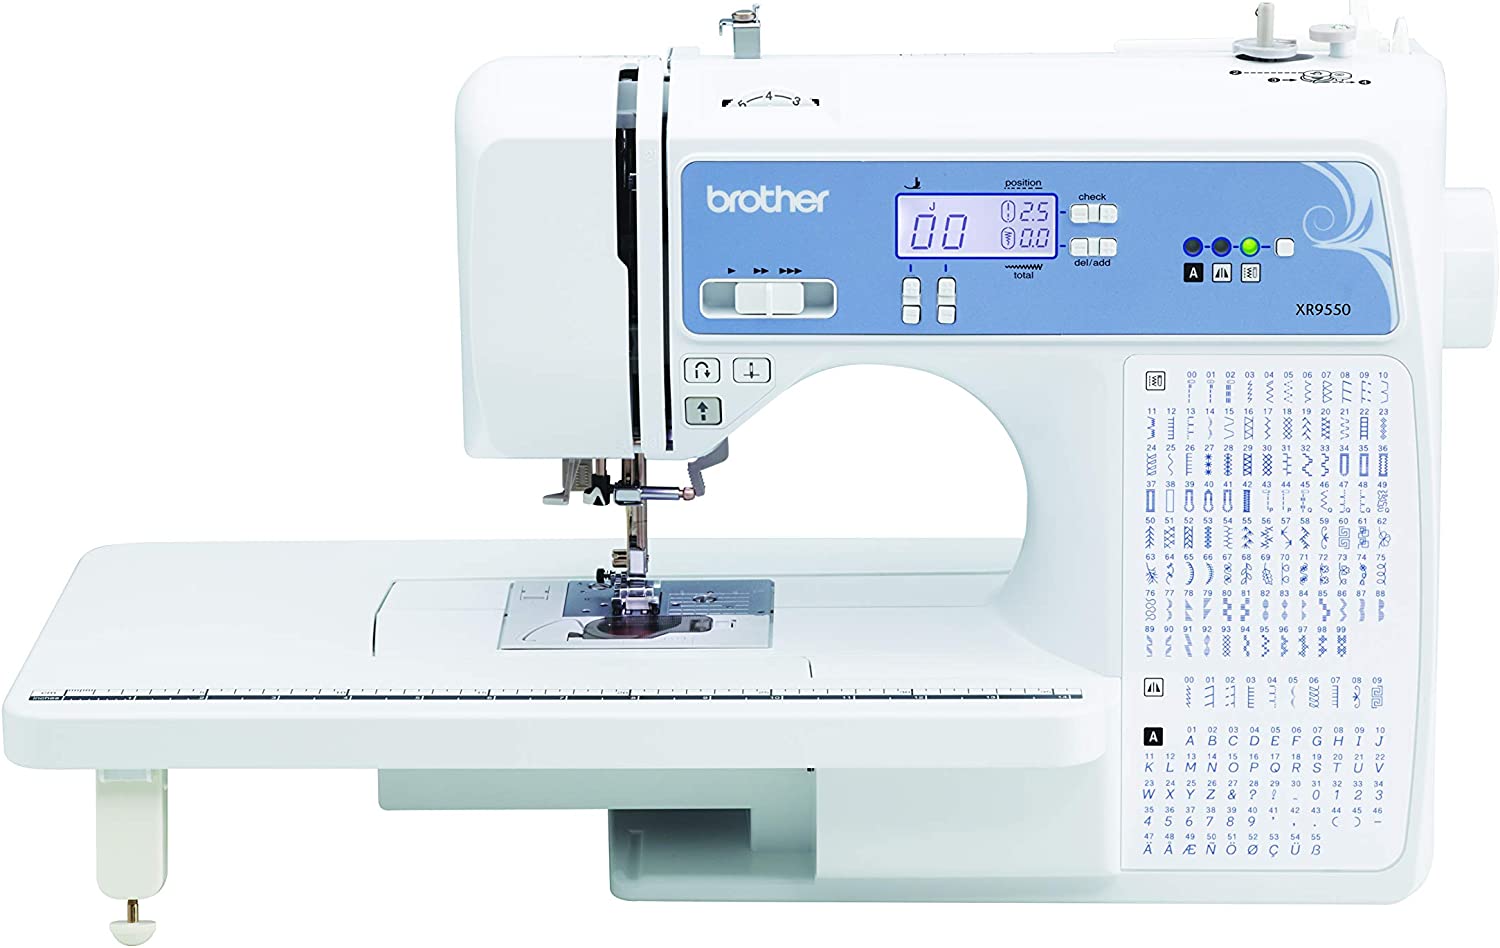 Brother-XR9550-Sewing-and-Quilting-Machine-Computerized-165-Built-in-Stitches-LCD-Display-Wide-Table-8-Included-Presser-Feet-20x12x17-White